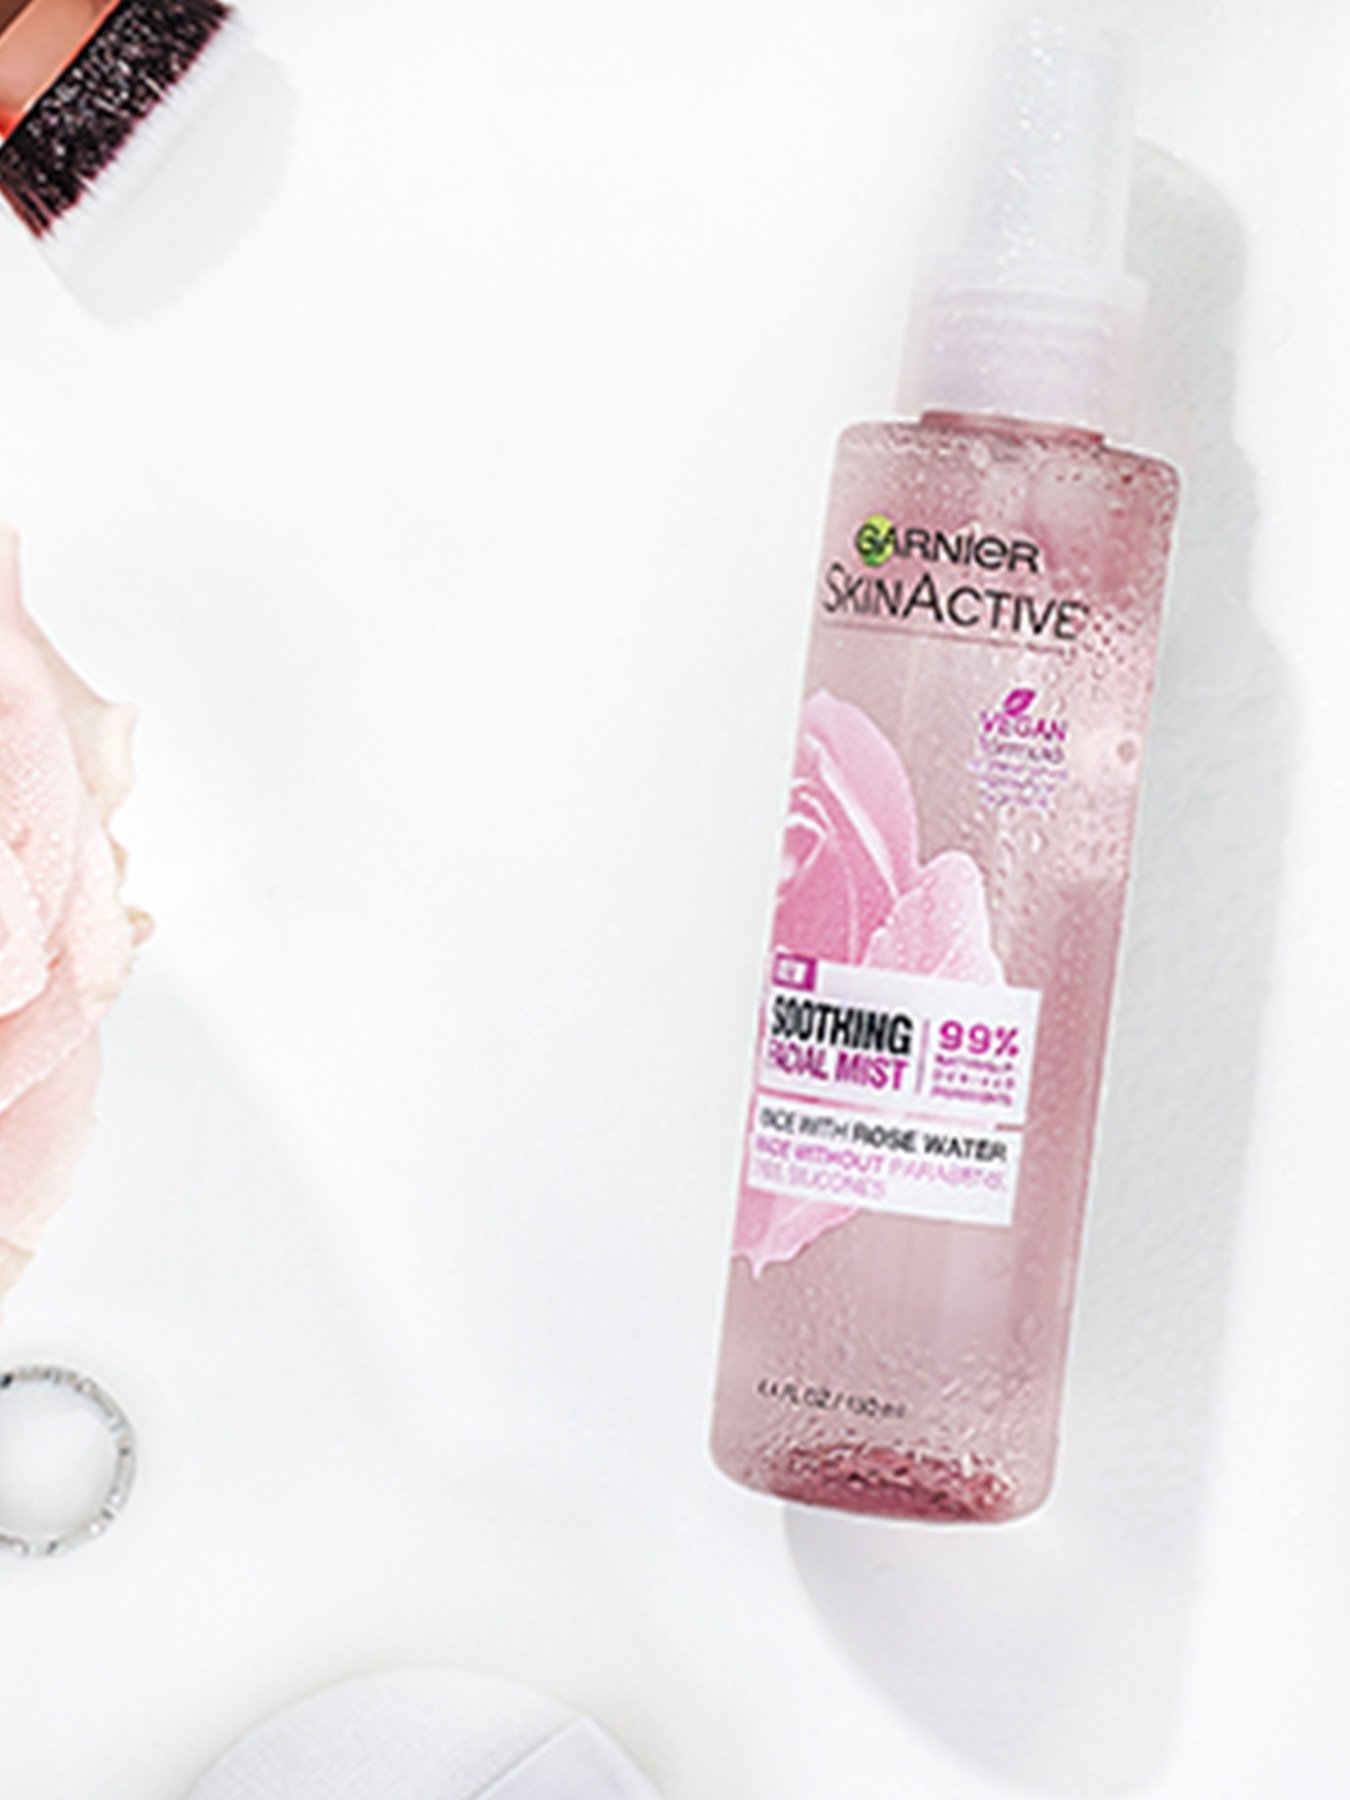 Garnier SkinActive Soothing Facial Mist with Rose Water on a white background with a makeup brush, pink rose, silver ring, and white case.